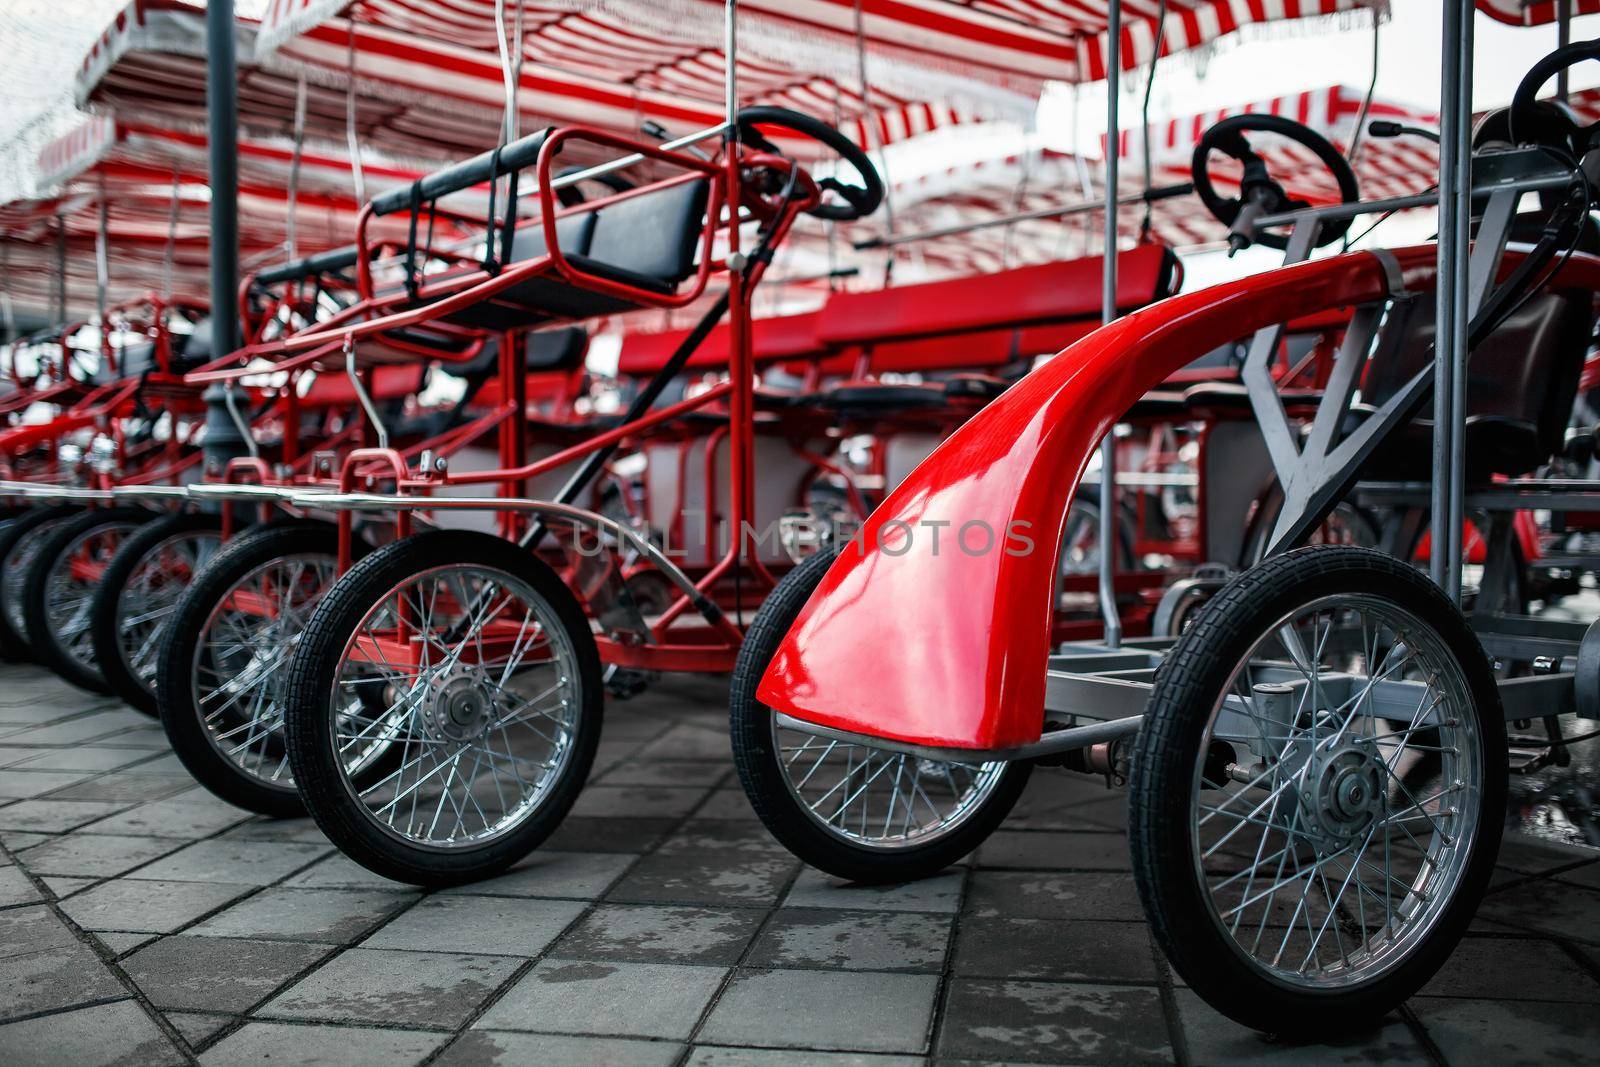 The Parking of four wheeled bicycles, velomobiles velomobiles red